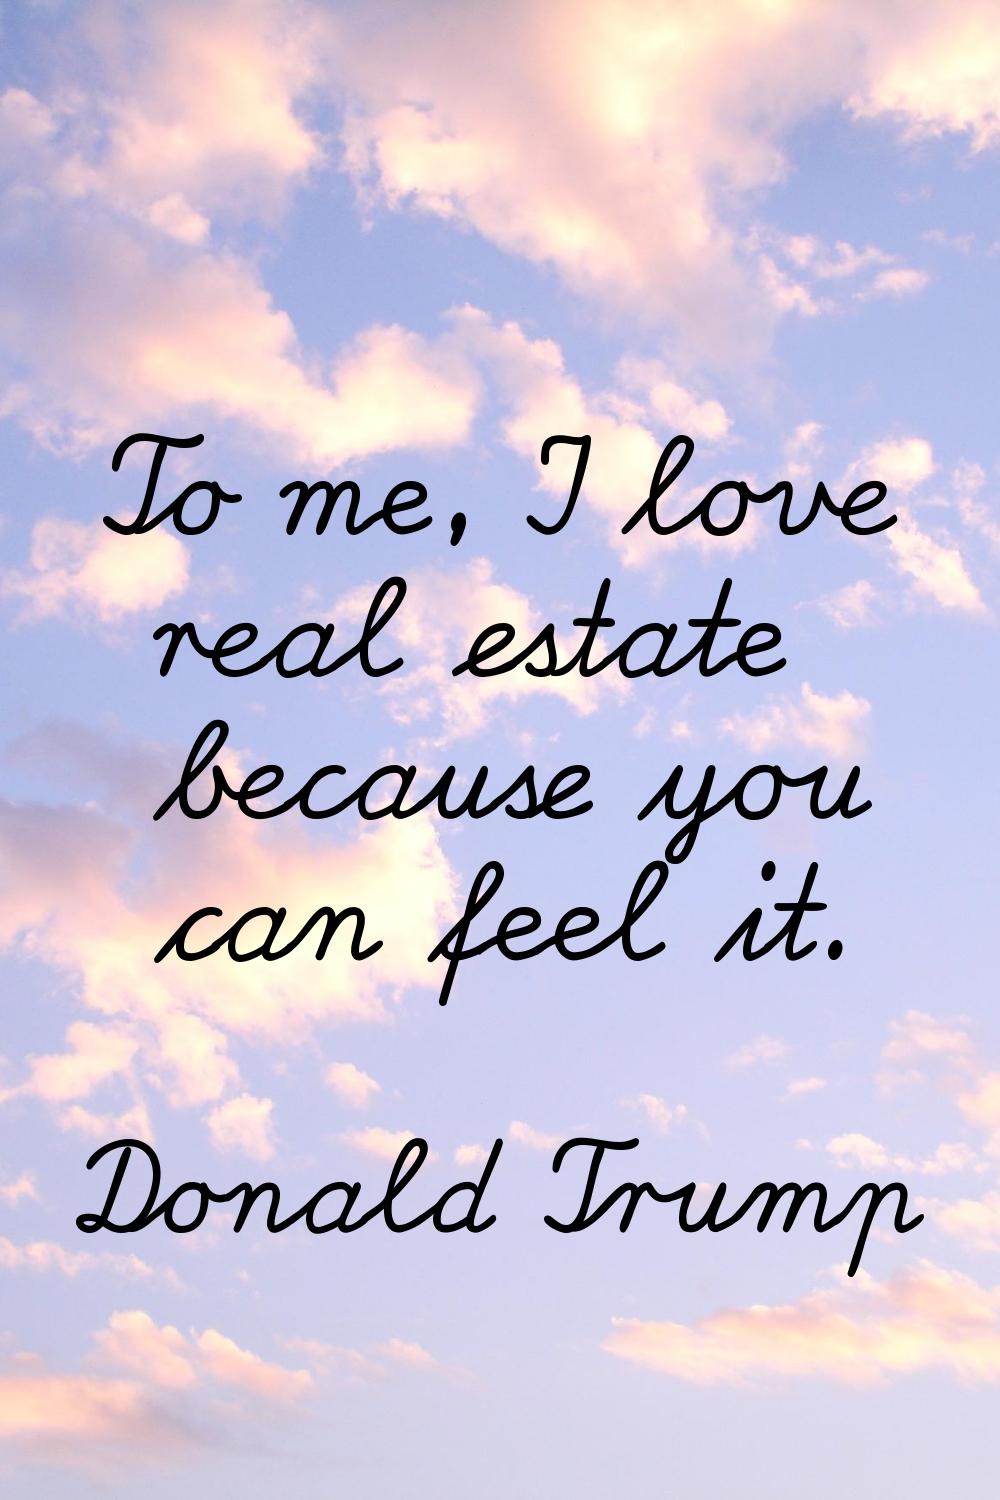 To me, I love real estate because you can feel it.